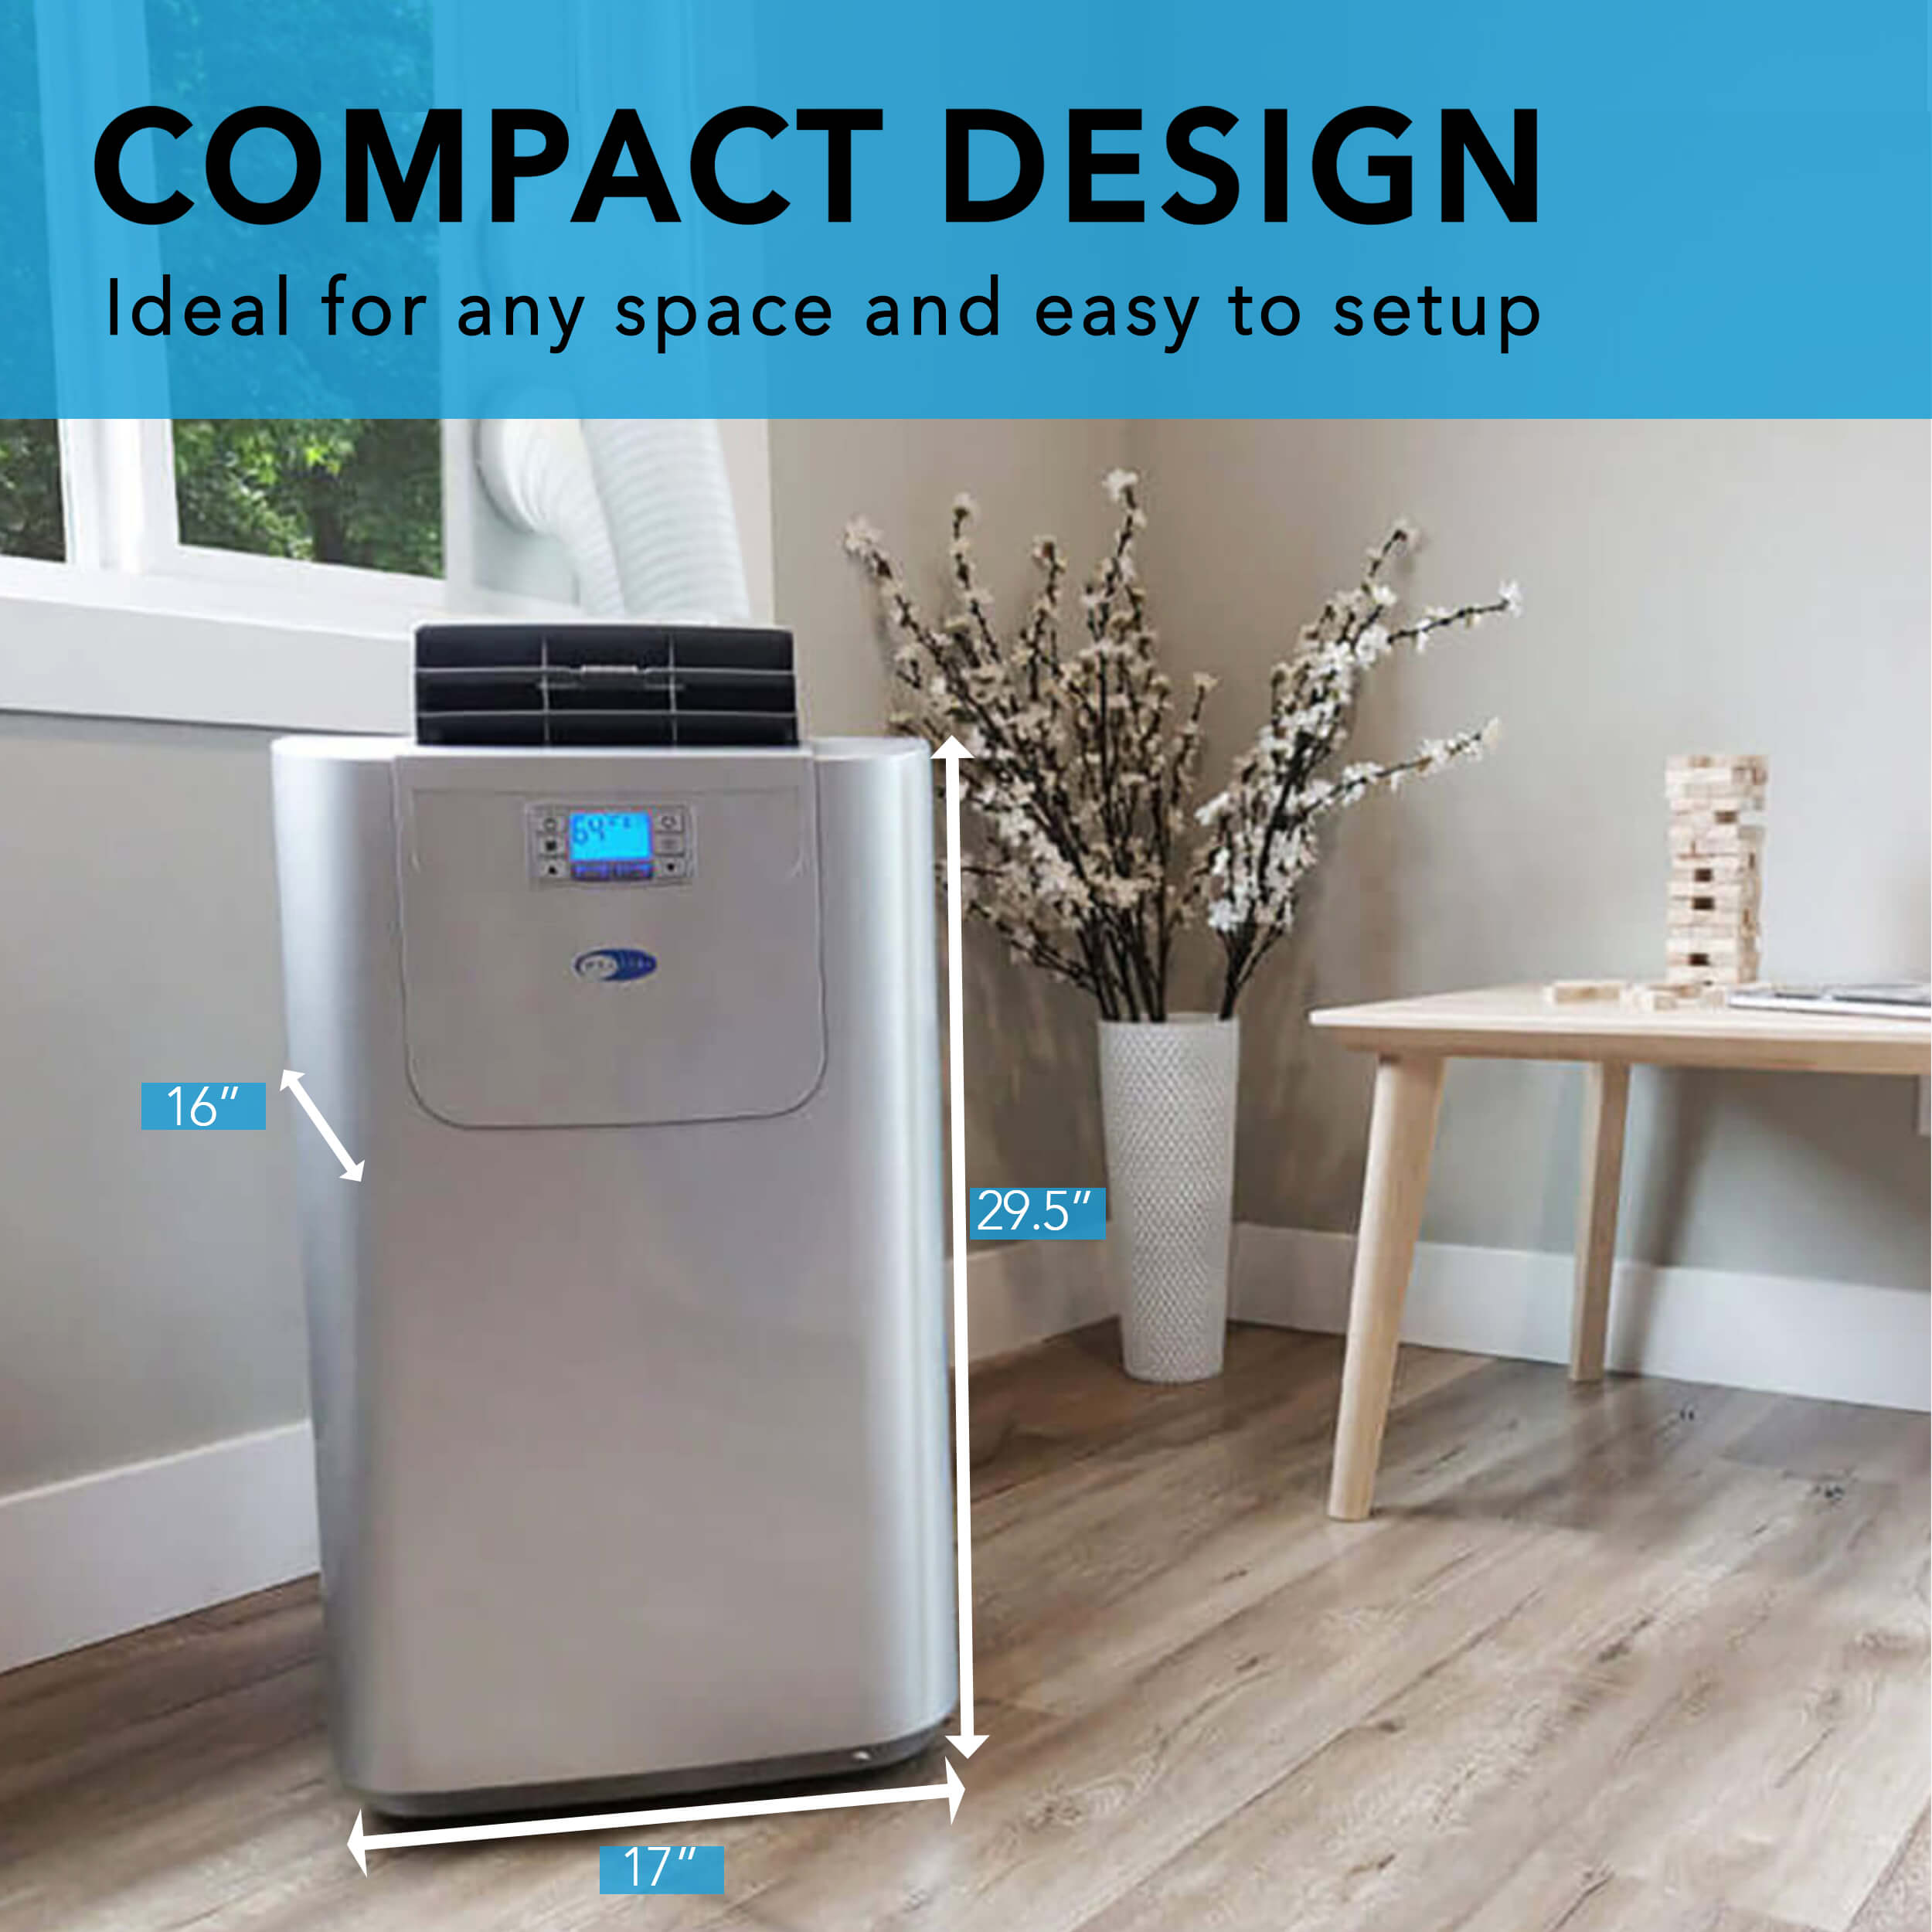 Whynter ARC-12S Portable Air Conditioner